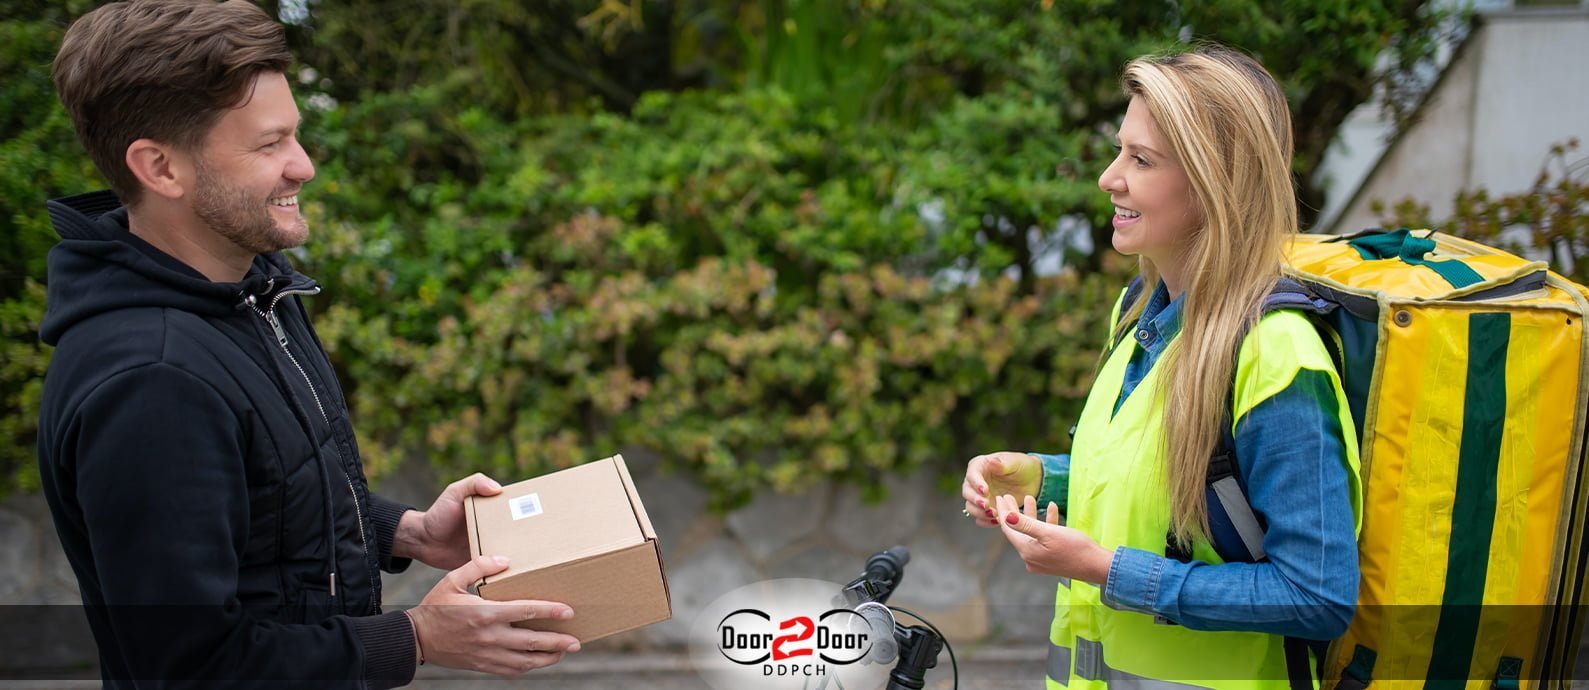 Express Courier Shipping Companies in China send parcel to all around the world.